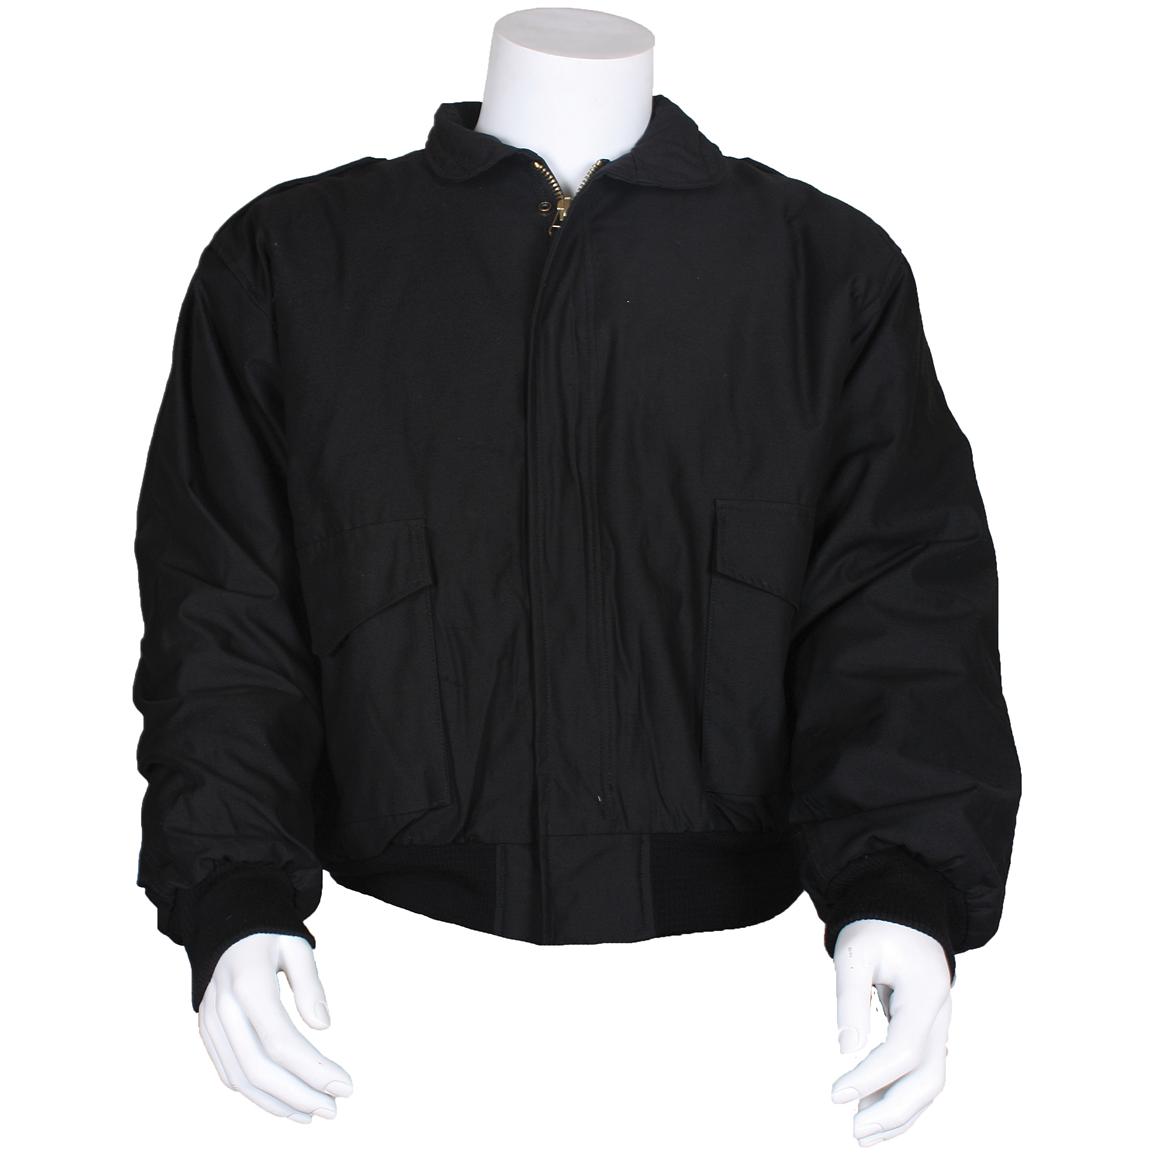 Fox Tactical™ M90 Pilot's Jacket with Liner - 296624, Tactical Clothing ...